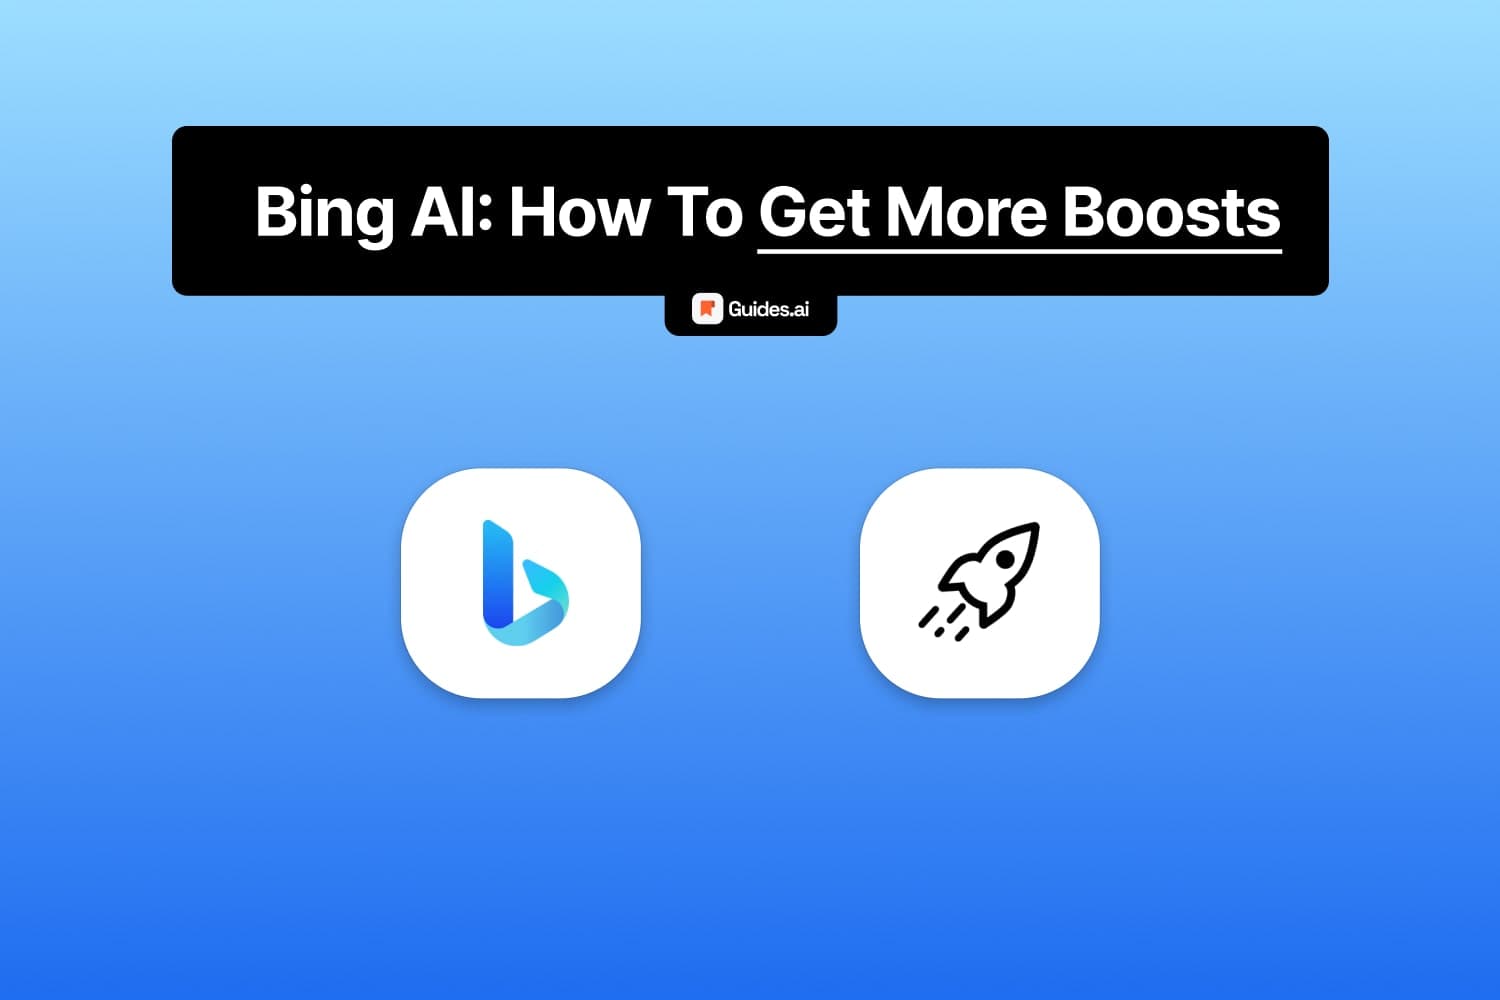 How to get more boosts in Bing AI Image Generator